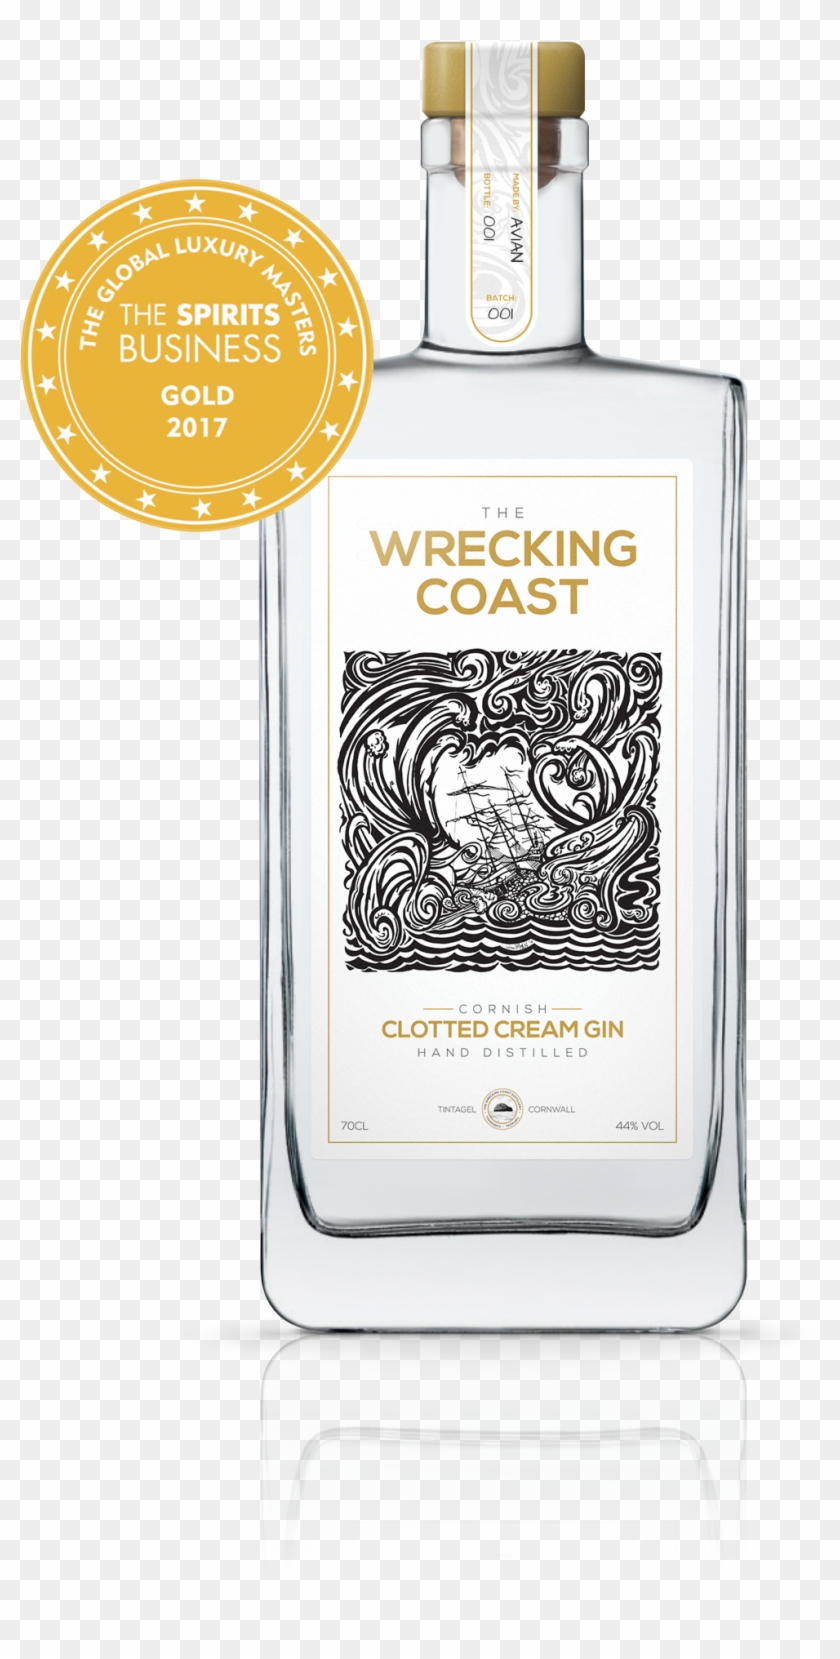 Born In Tintagel - Wrecking Coast Clotted Cream Gin Clipart